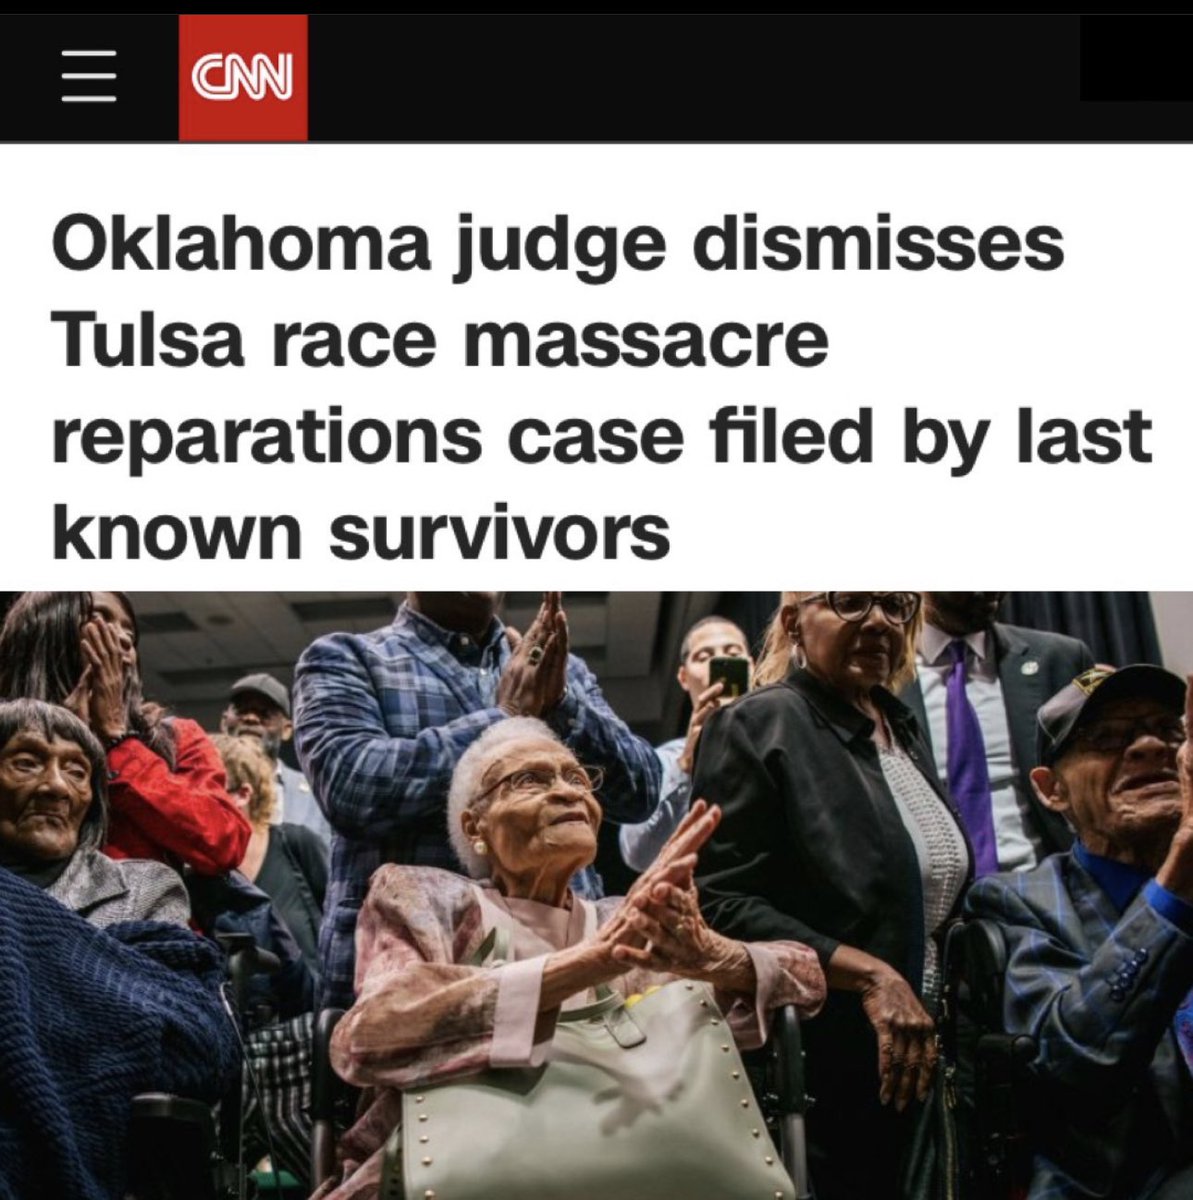 An Oklahoma judge dismissed the reparations lawsuit filed by Lessie Benningfield Randle, 108, Viola Fletcher, 109, and her brother, Hughes Van Ellis, 102, the last three known survivors of the Tulsa race massacre. America has $70 Billion for Ukrainians in conflict with Russians…